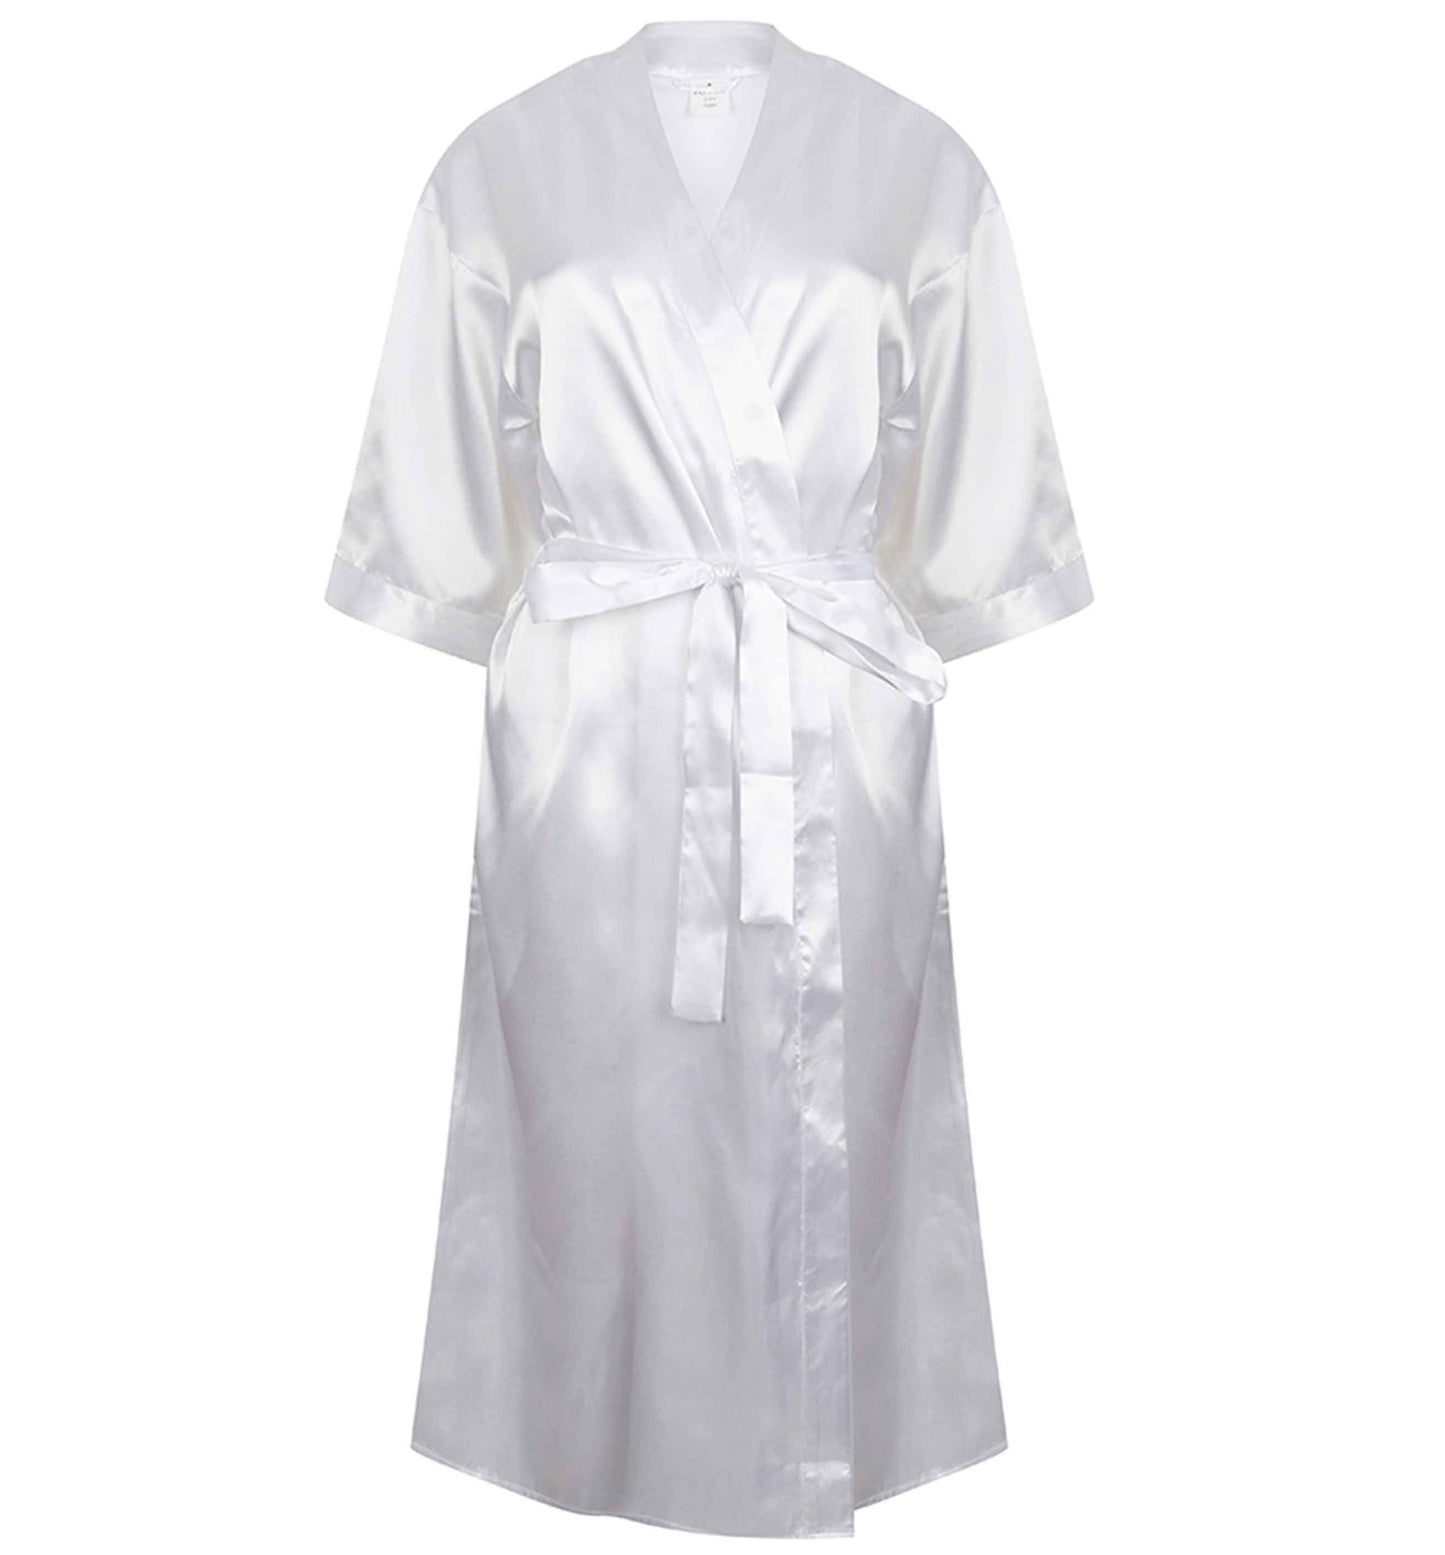 We're getting married! Better late than never! | 8-18 | Kimono style satin robe | Ladies dressing gown